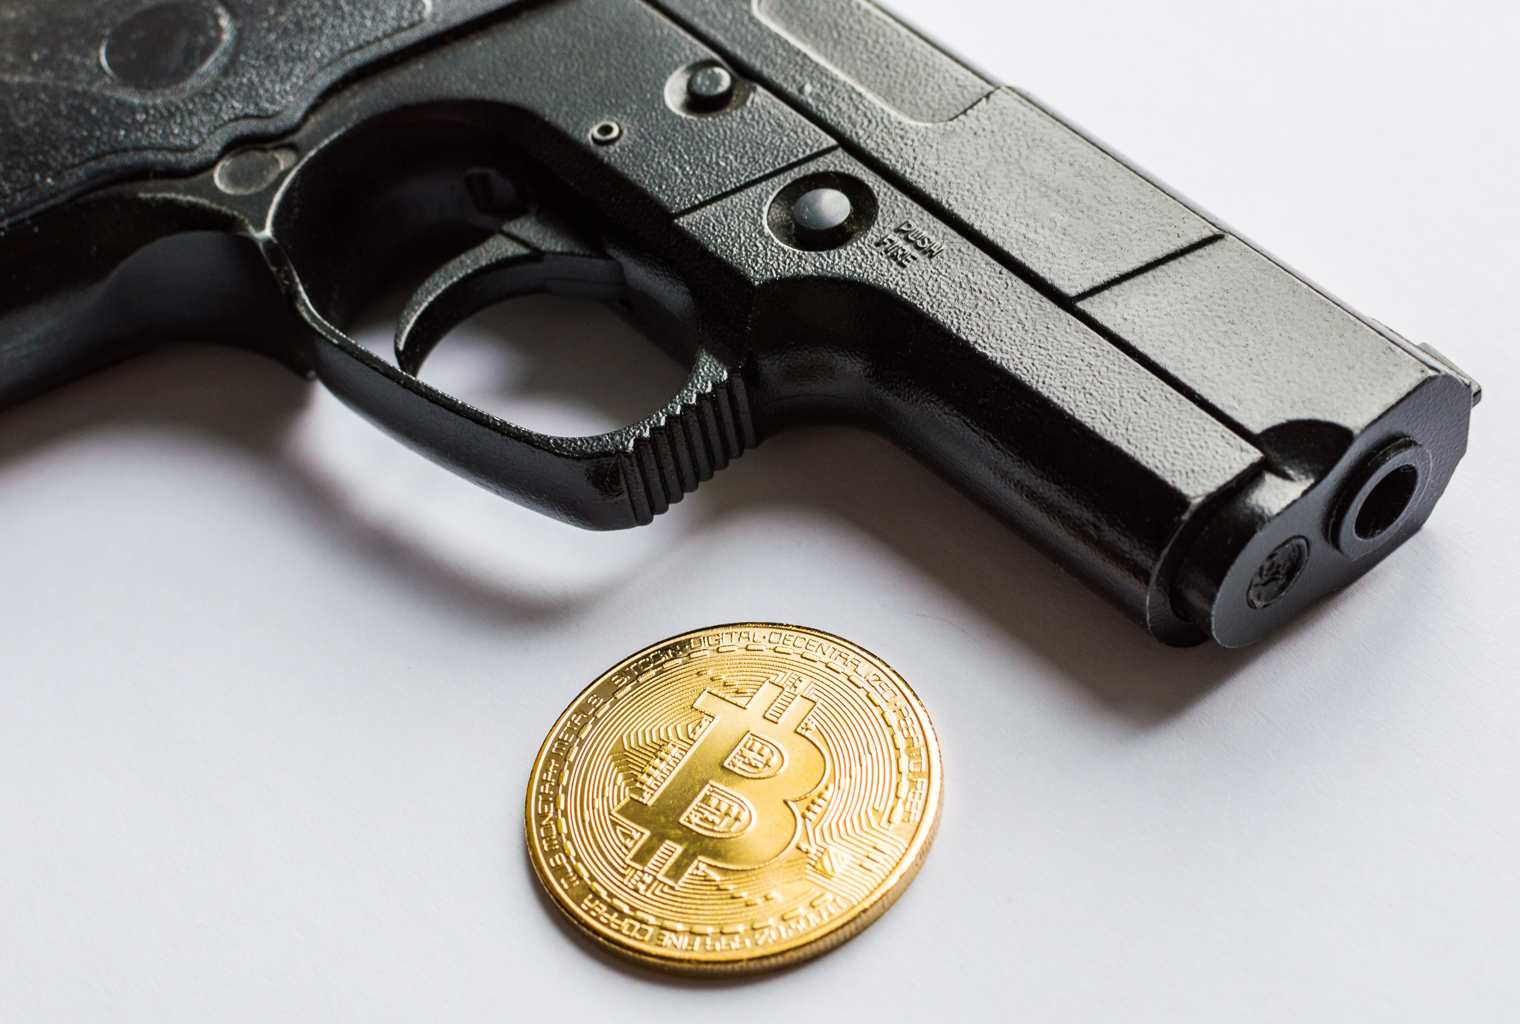 The Guns N’ Bitcoin Scorpion Case Holds Your Pistol and Digital Assets